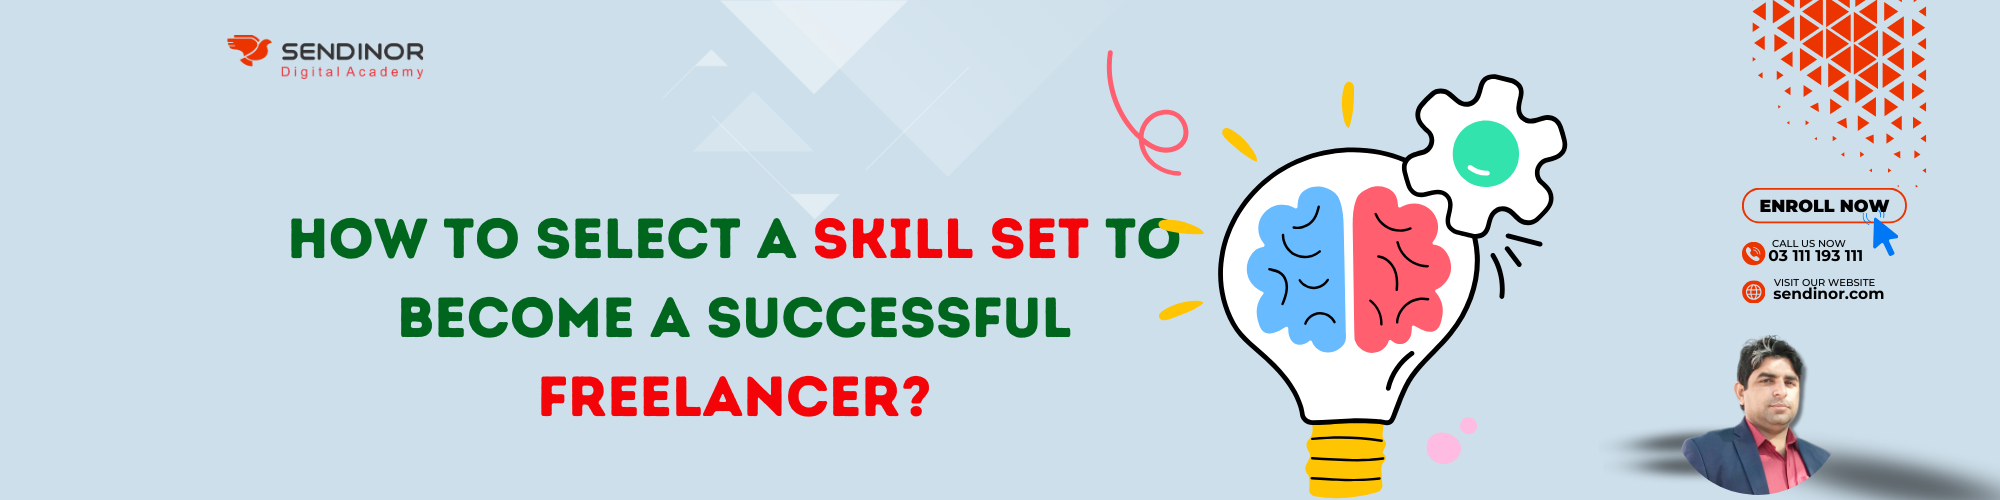 How To Select a Skill Set to Become a Successful Freelancer?